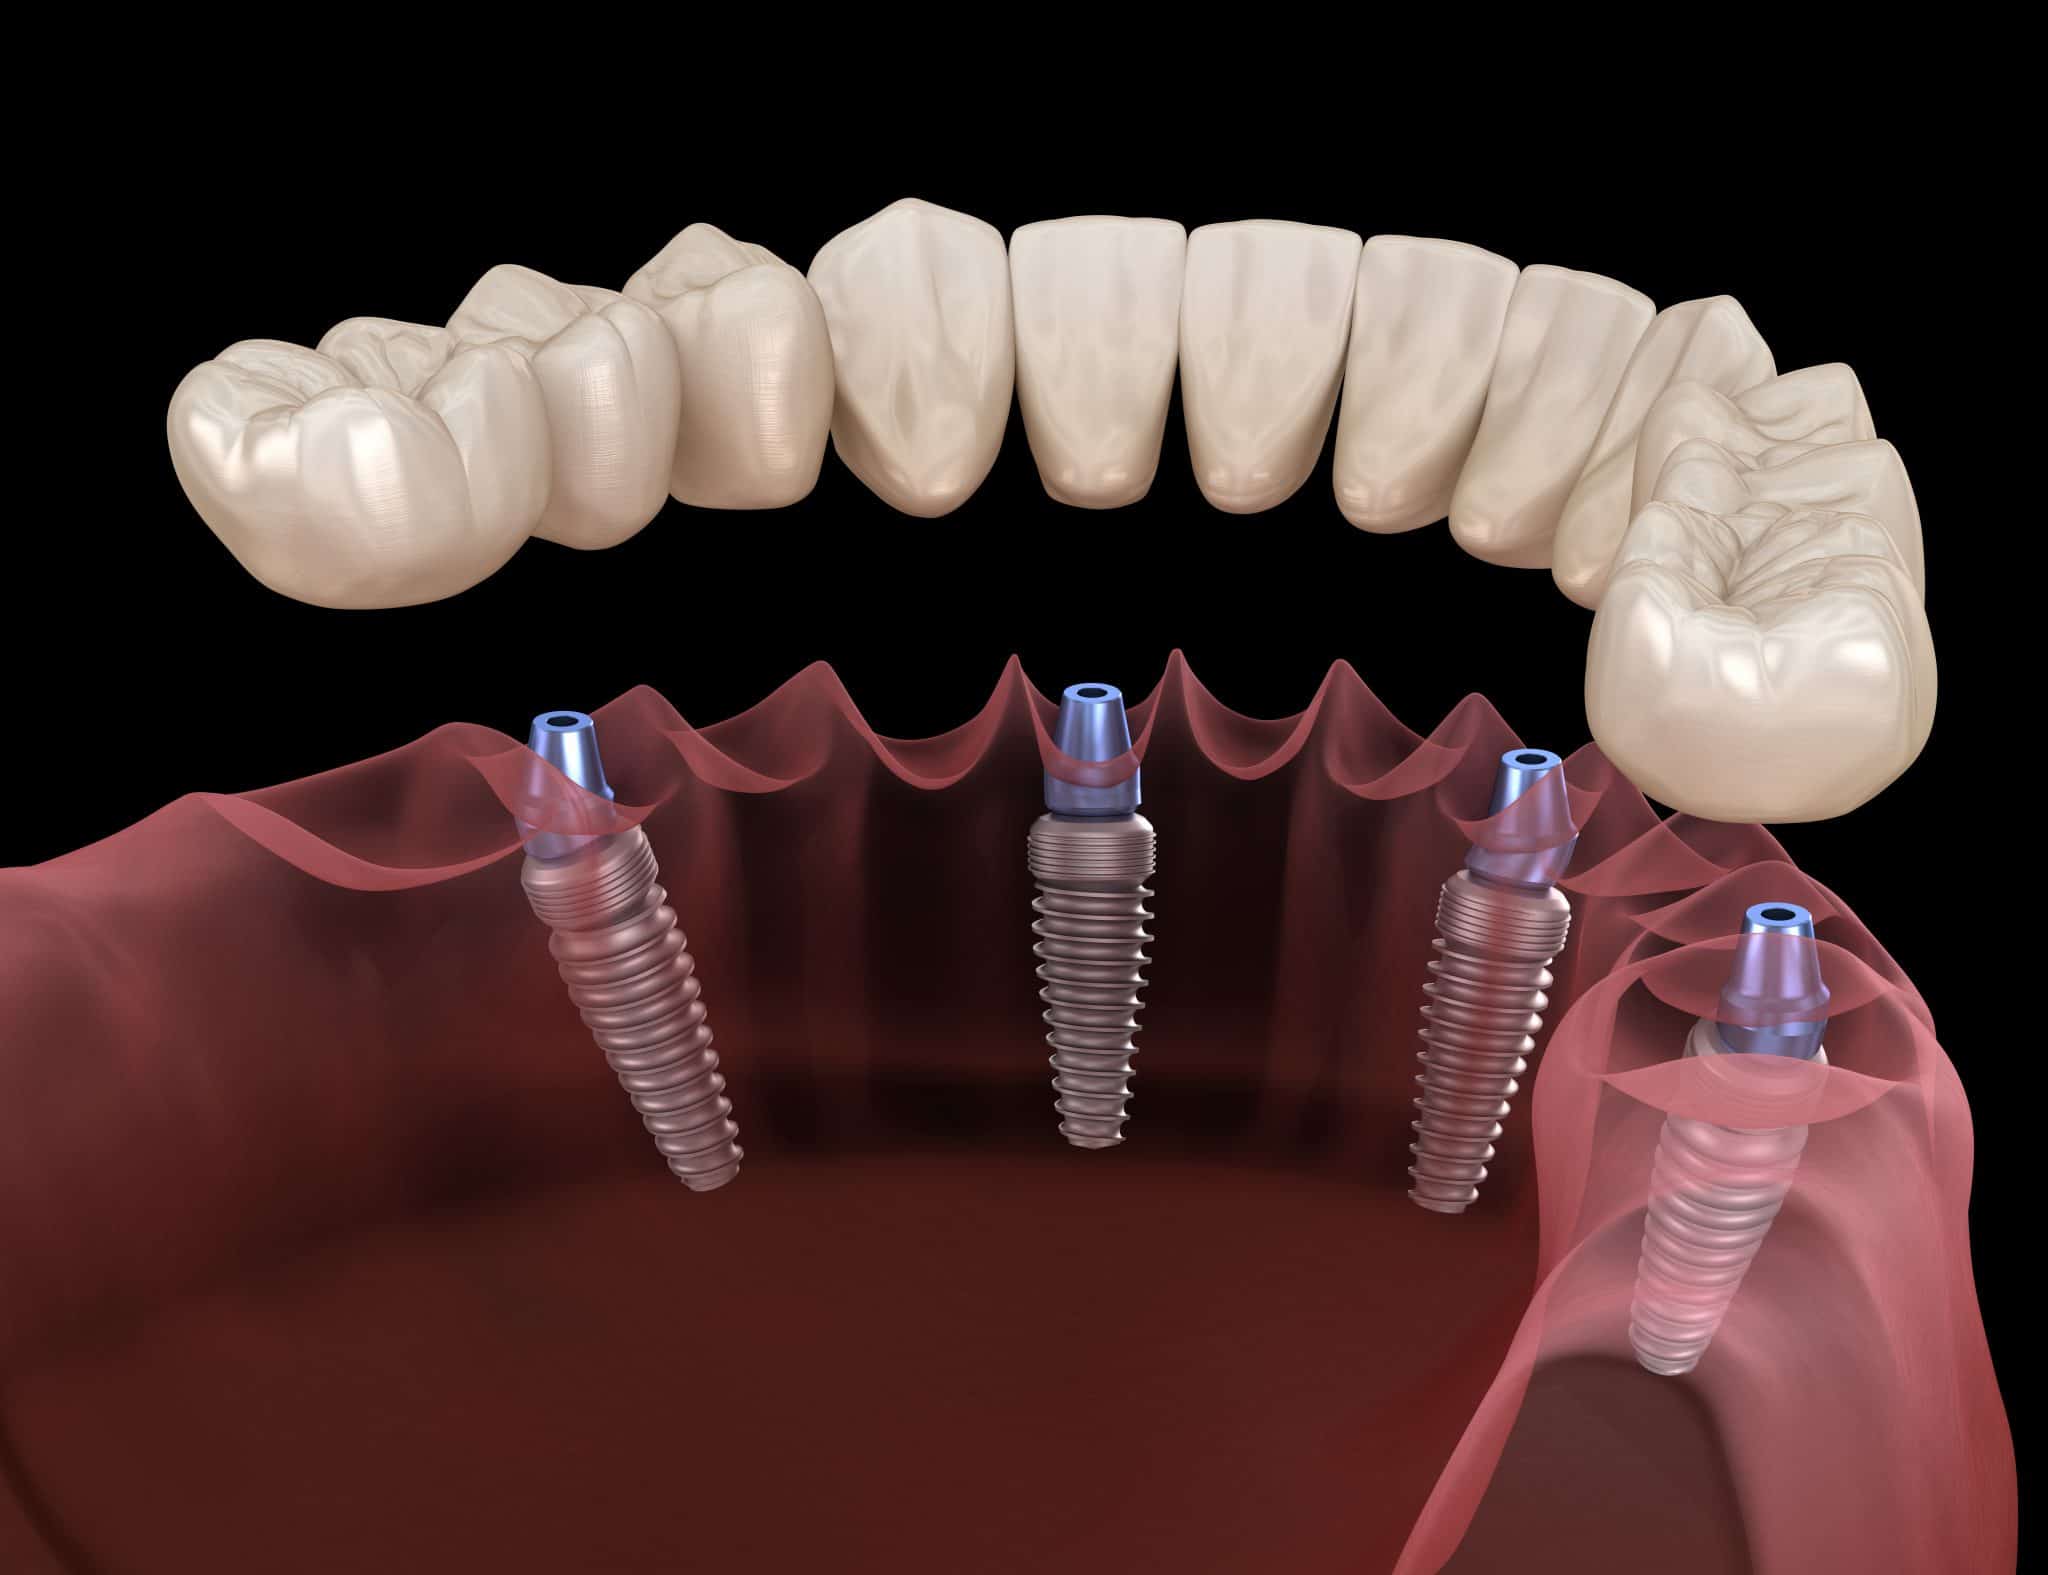 clear choice dental implants featured image